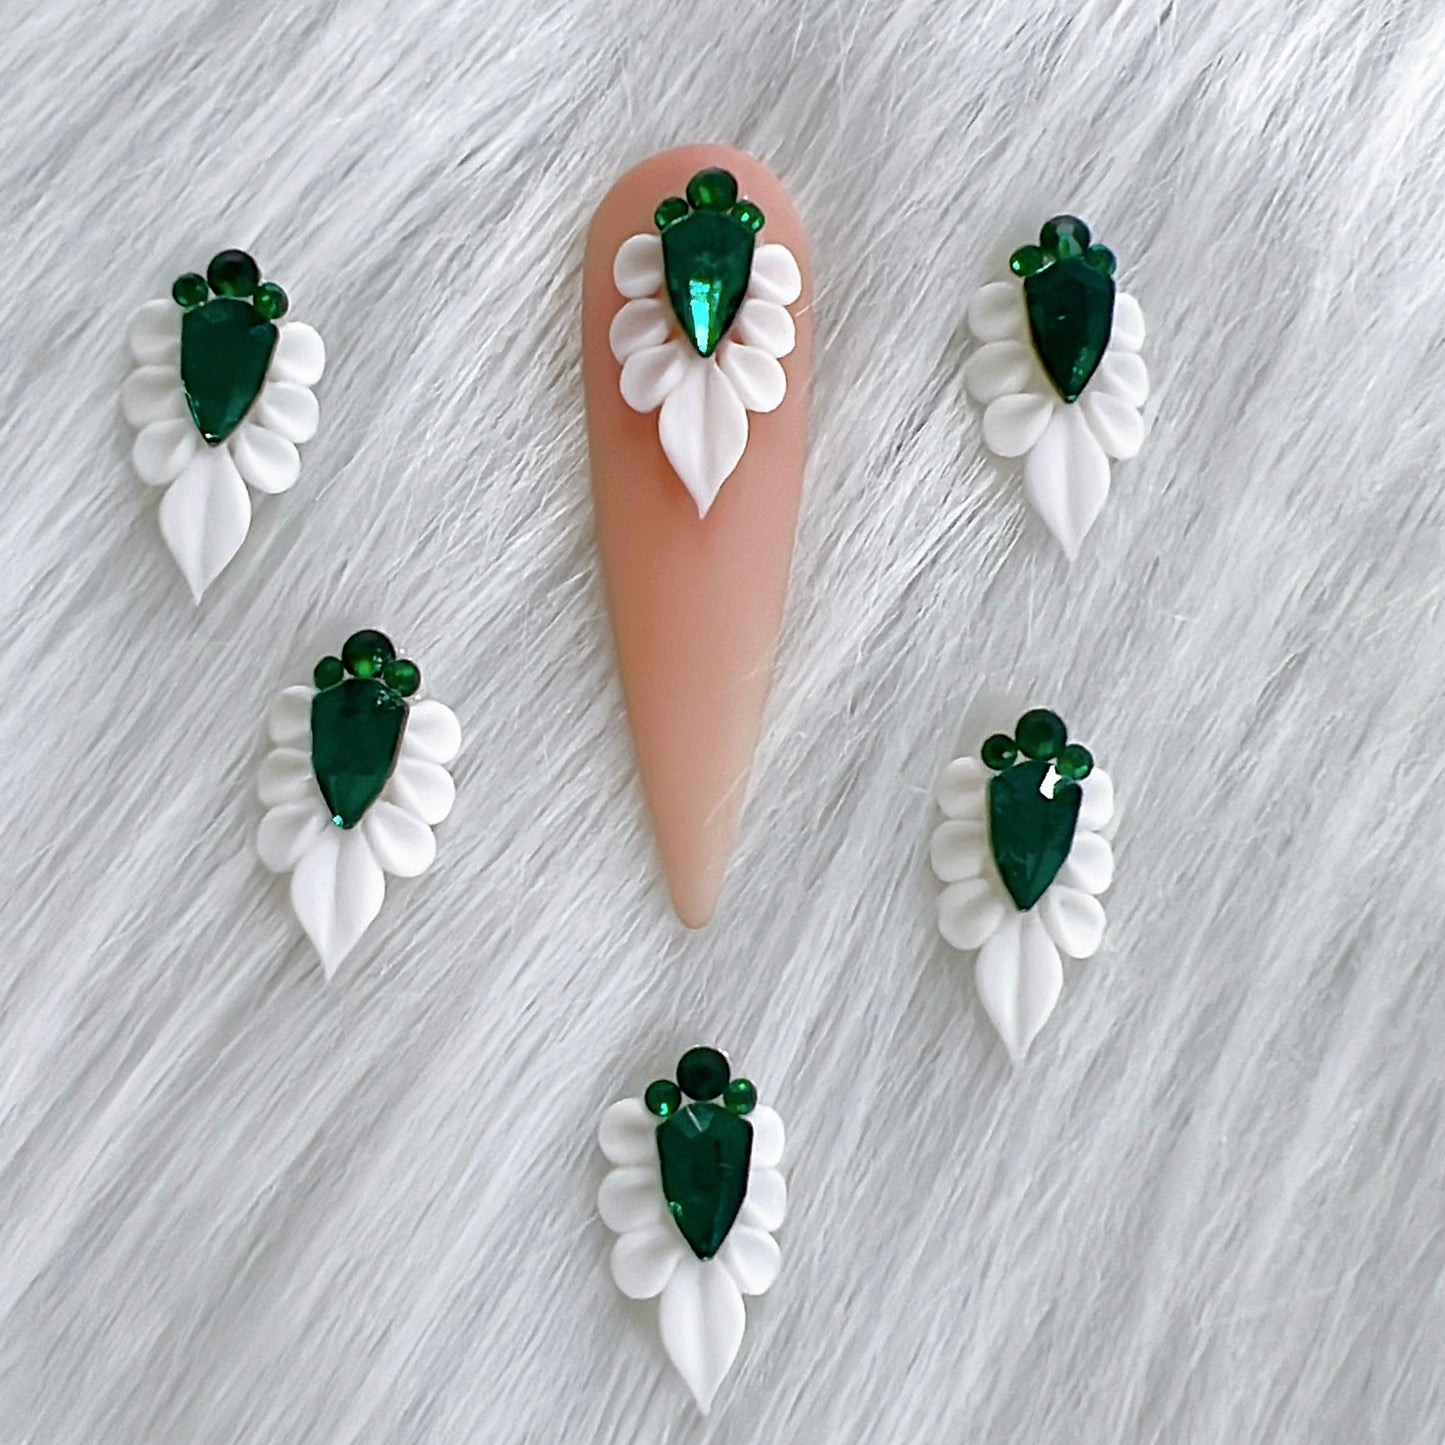 4 Pieces White 3D Acrylic Nail Flower with Emerald Green Crystal